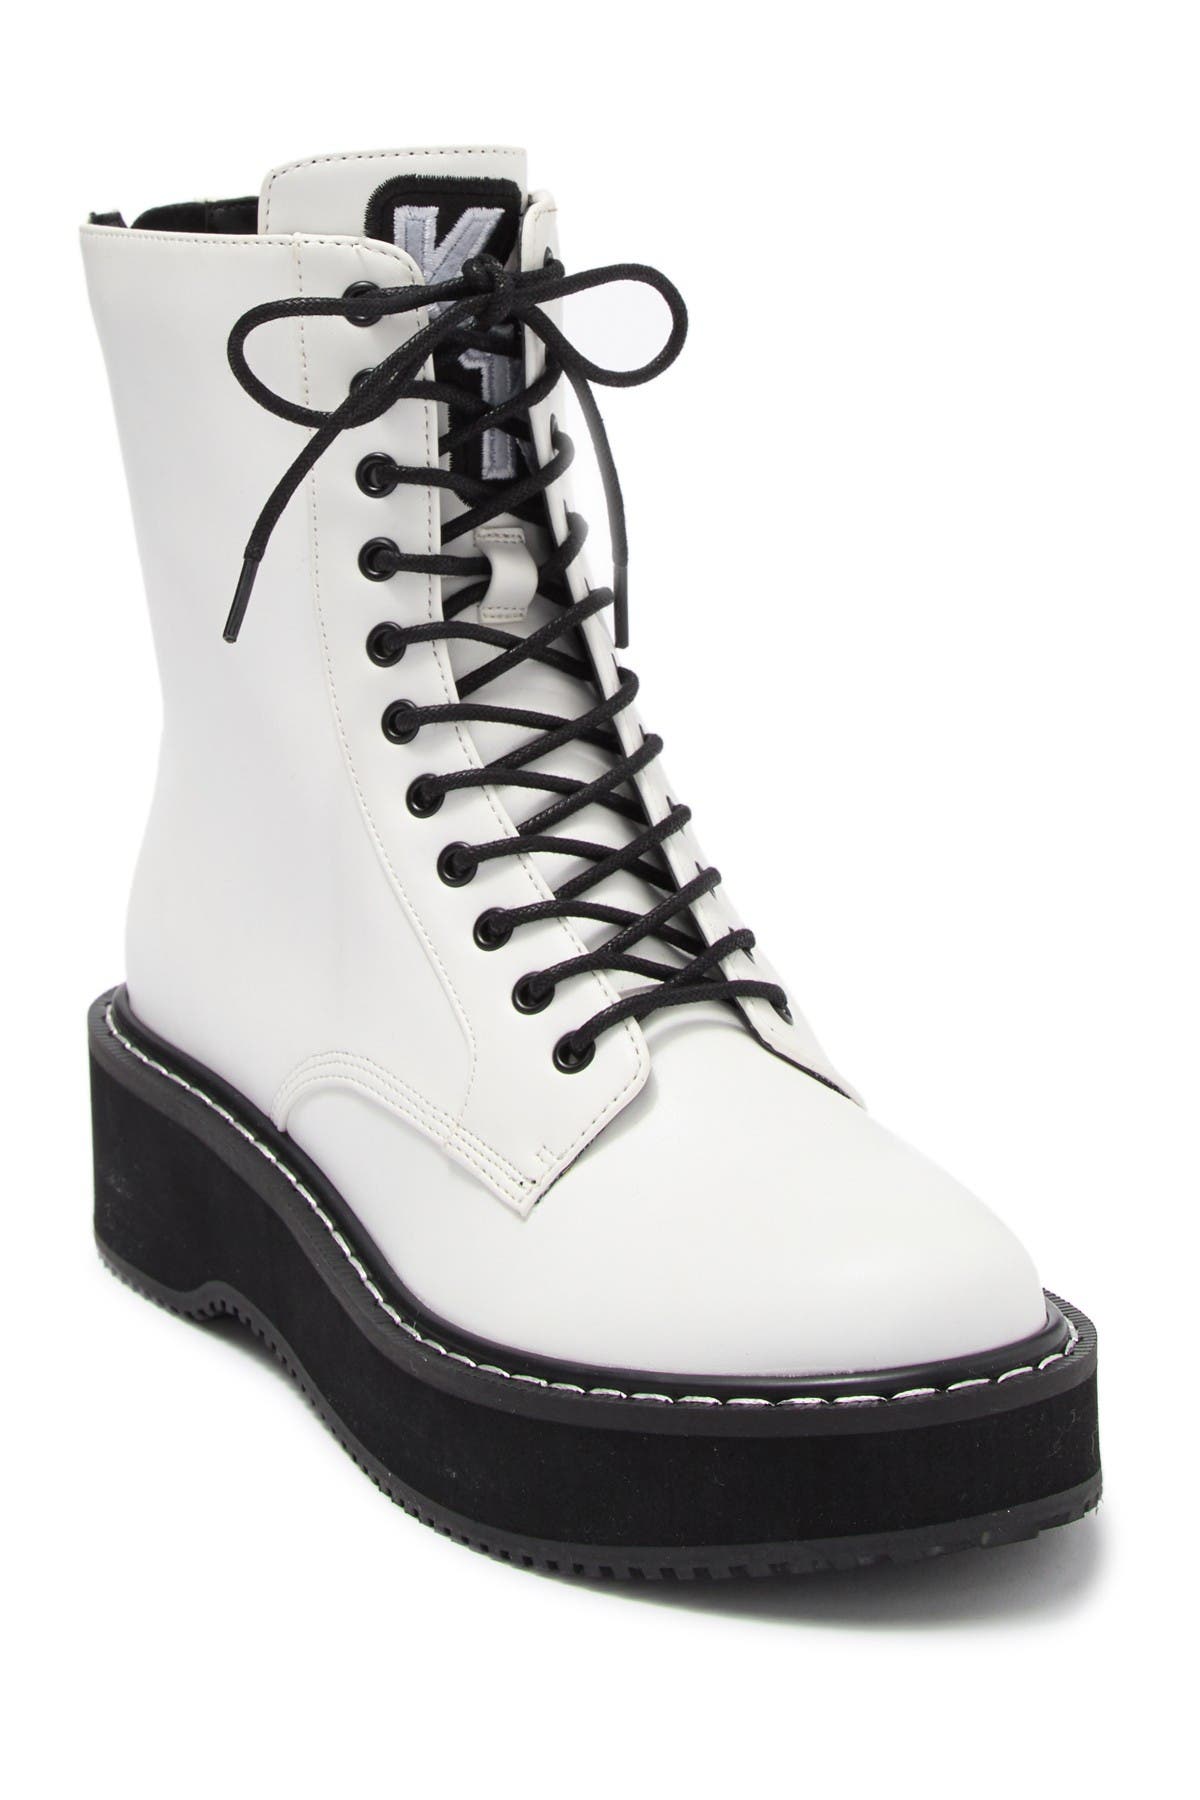 kendall and kylie white combat boots